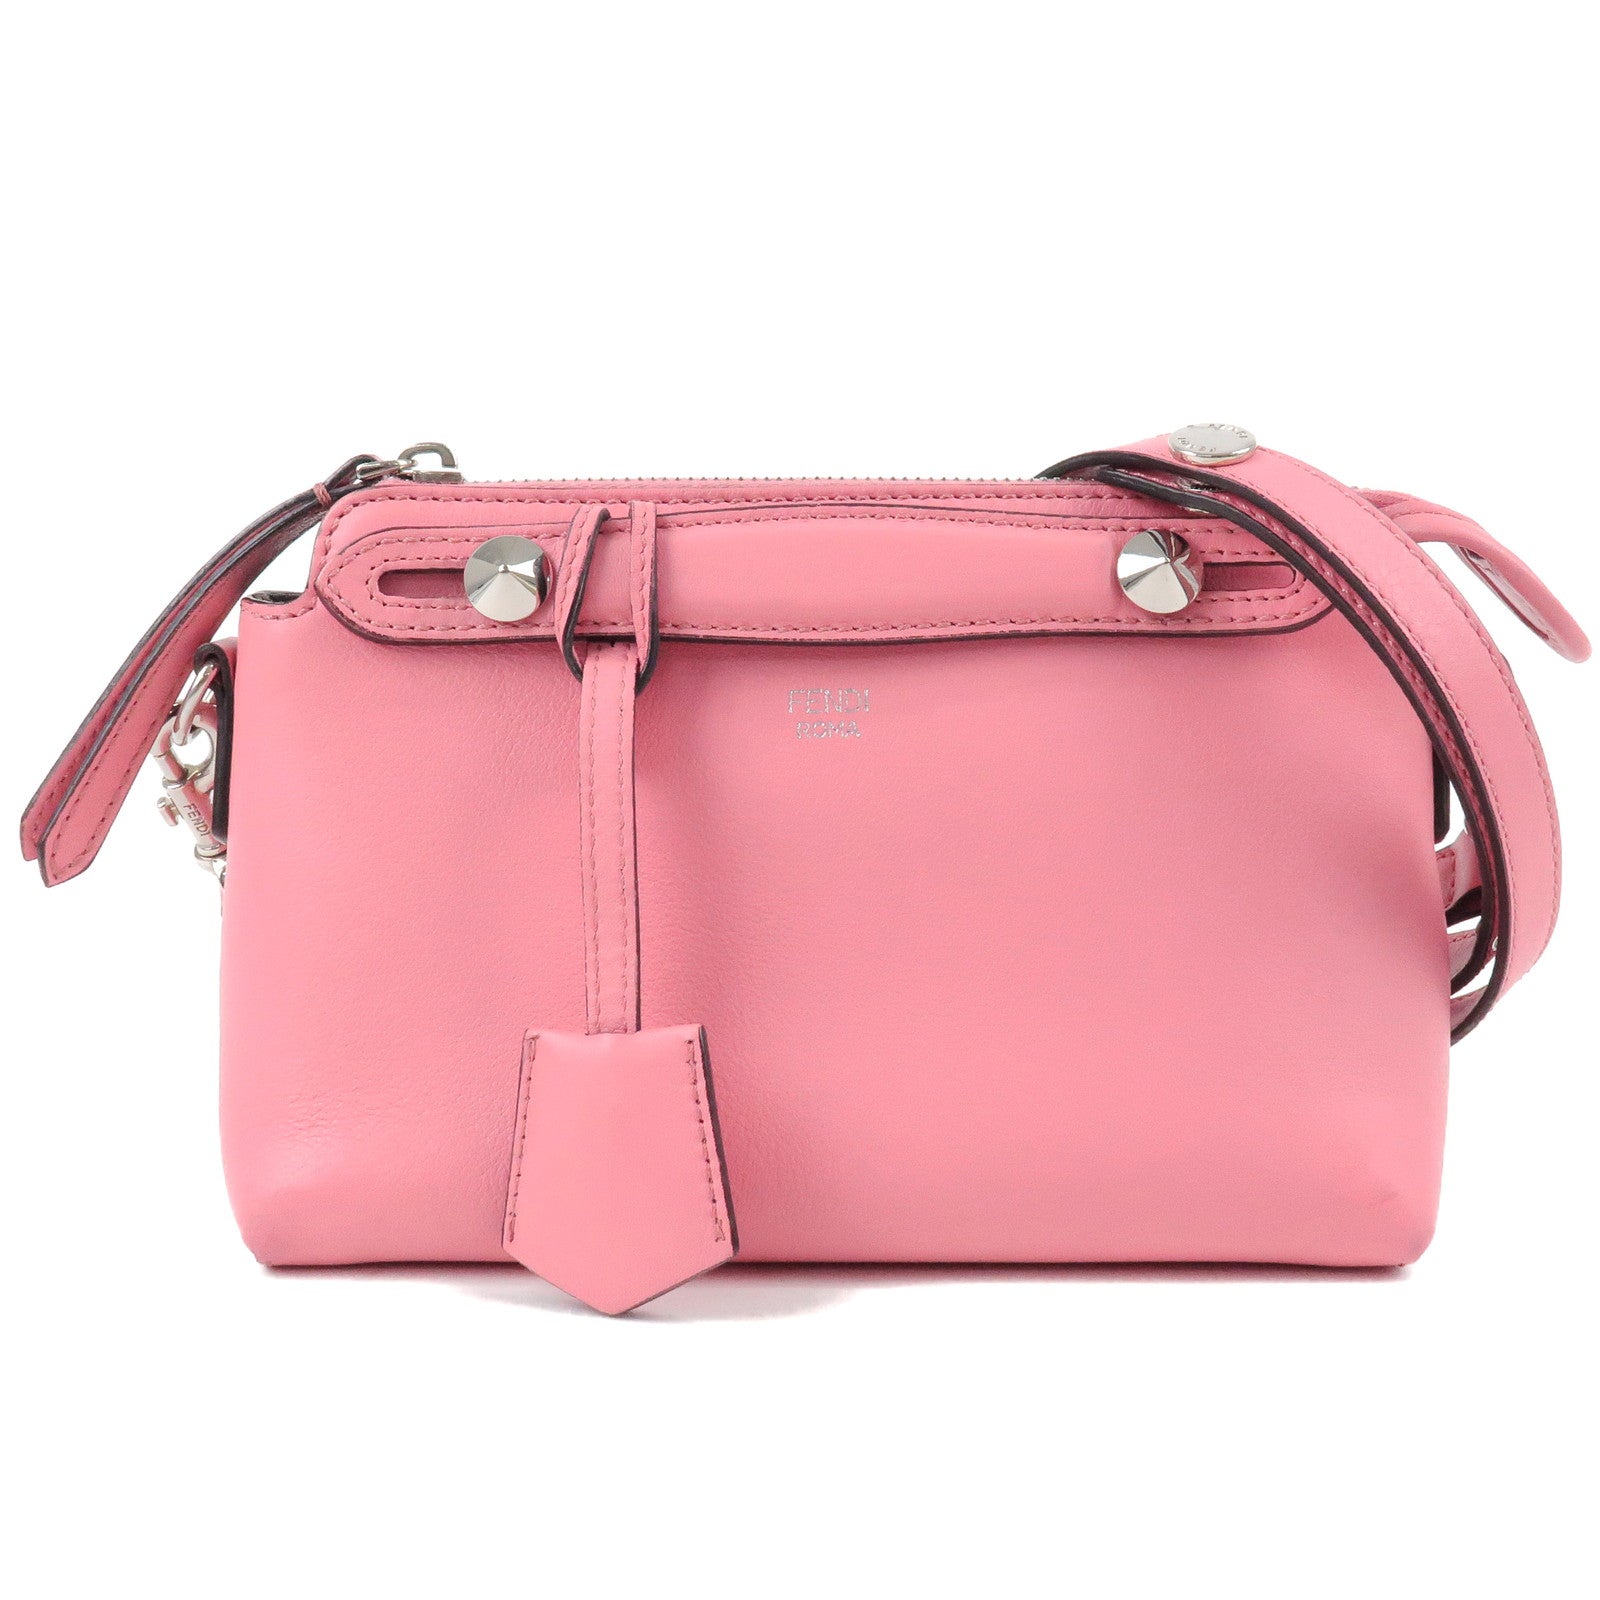 FENDI-By-The-Way-Mini-2Way-Leather-Shoulder-Bag-Pink-8BL135